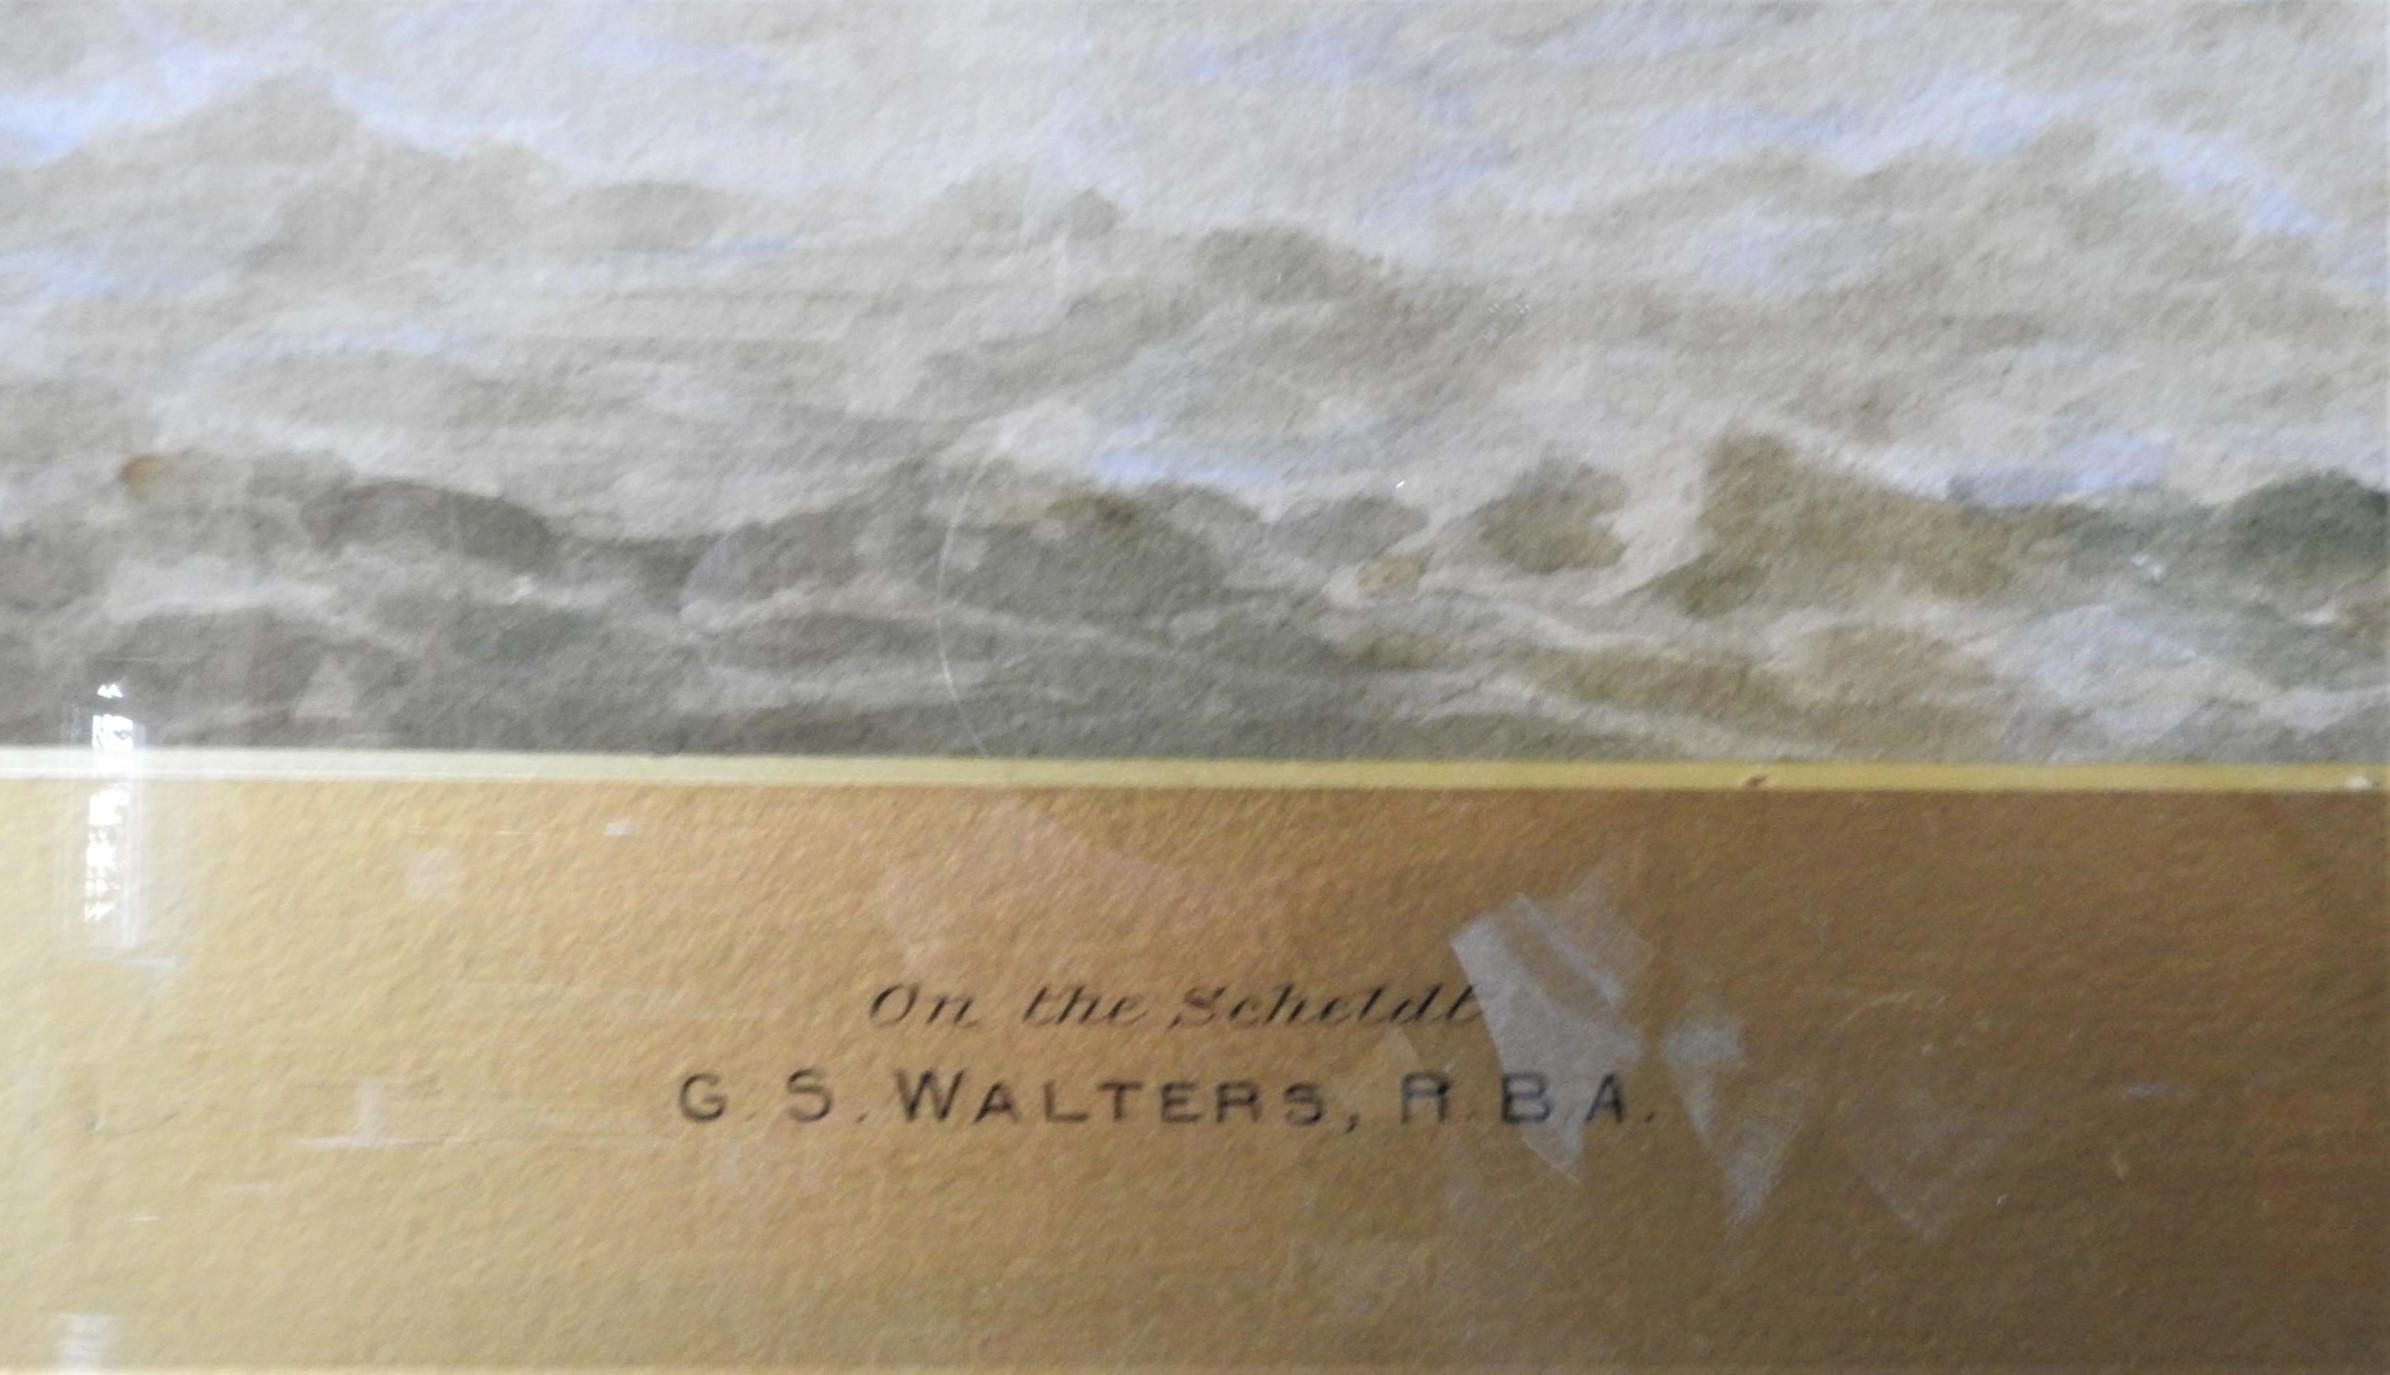 MARITIME WATER COLOUR ON PAPER 'ON THE SCHELDT', G.S WALTERS R.B.A, signed in bottom left corner - Image 3 of 3